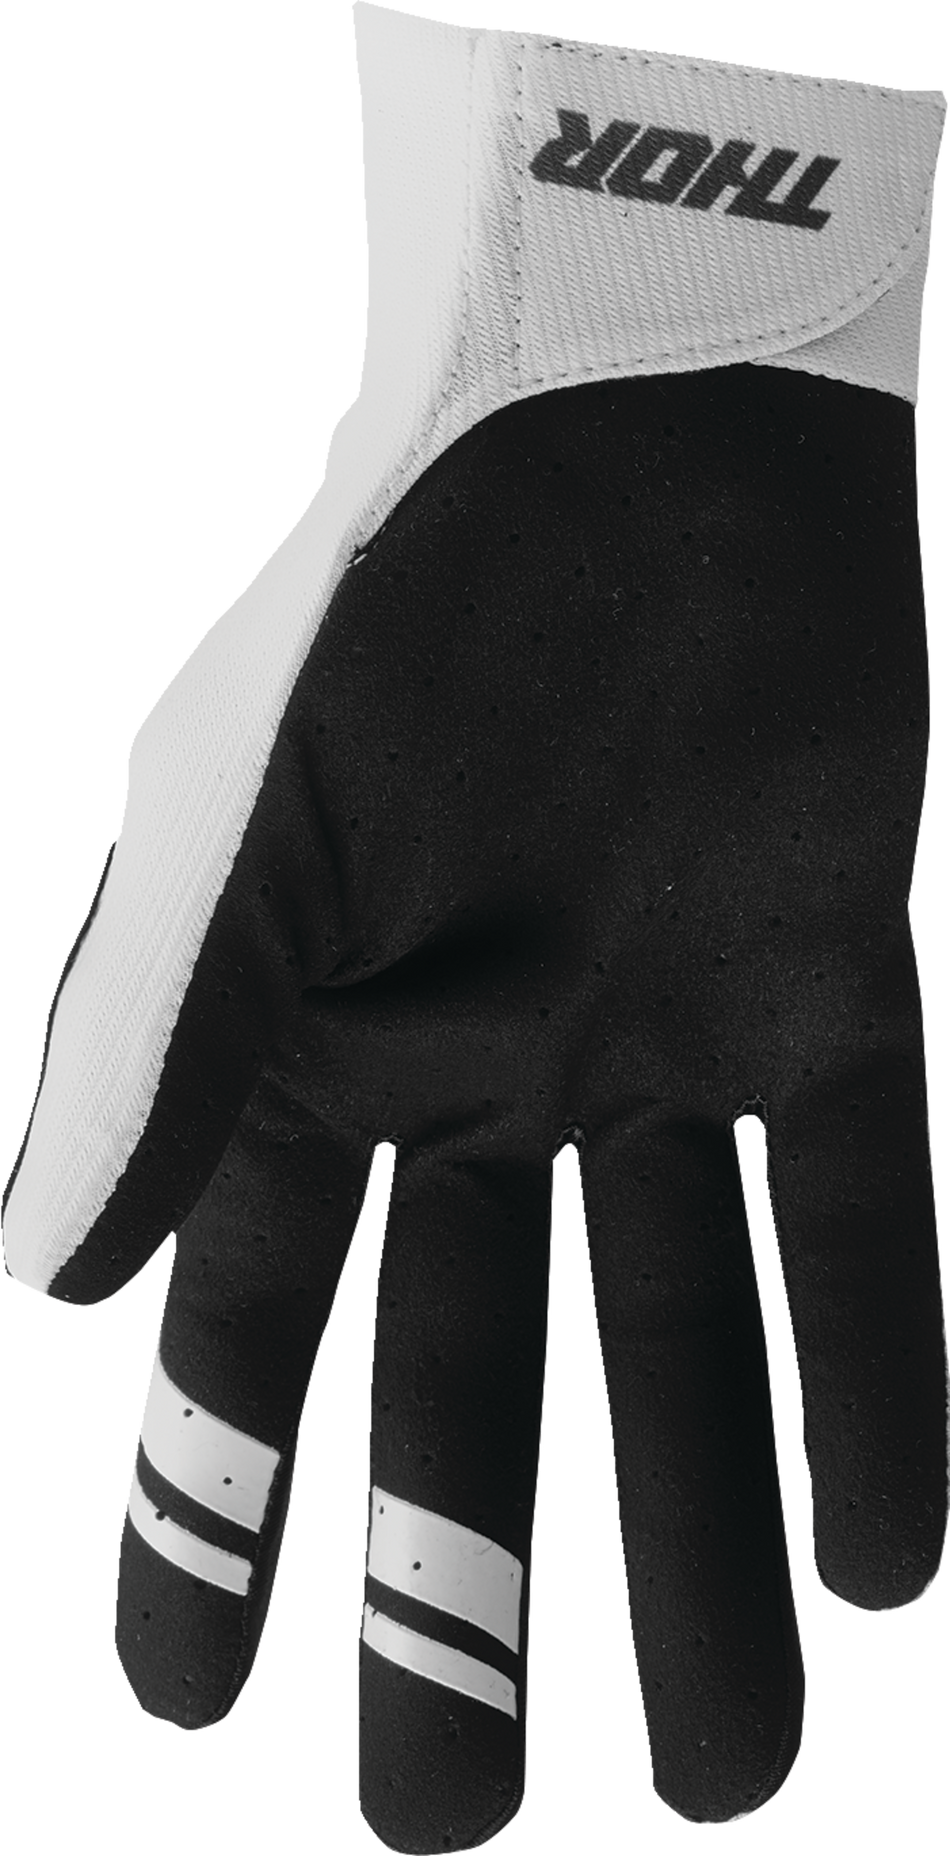 THOR Intense Assist Decoy Gloves - White/Camo - Small 3360-0224